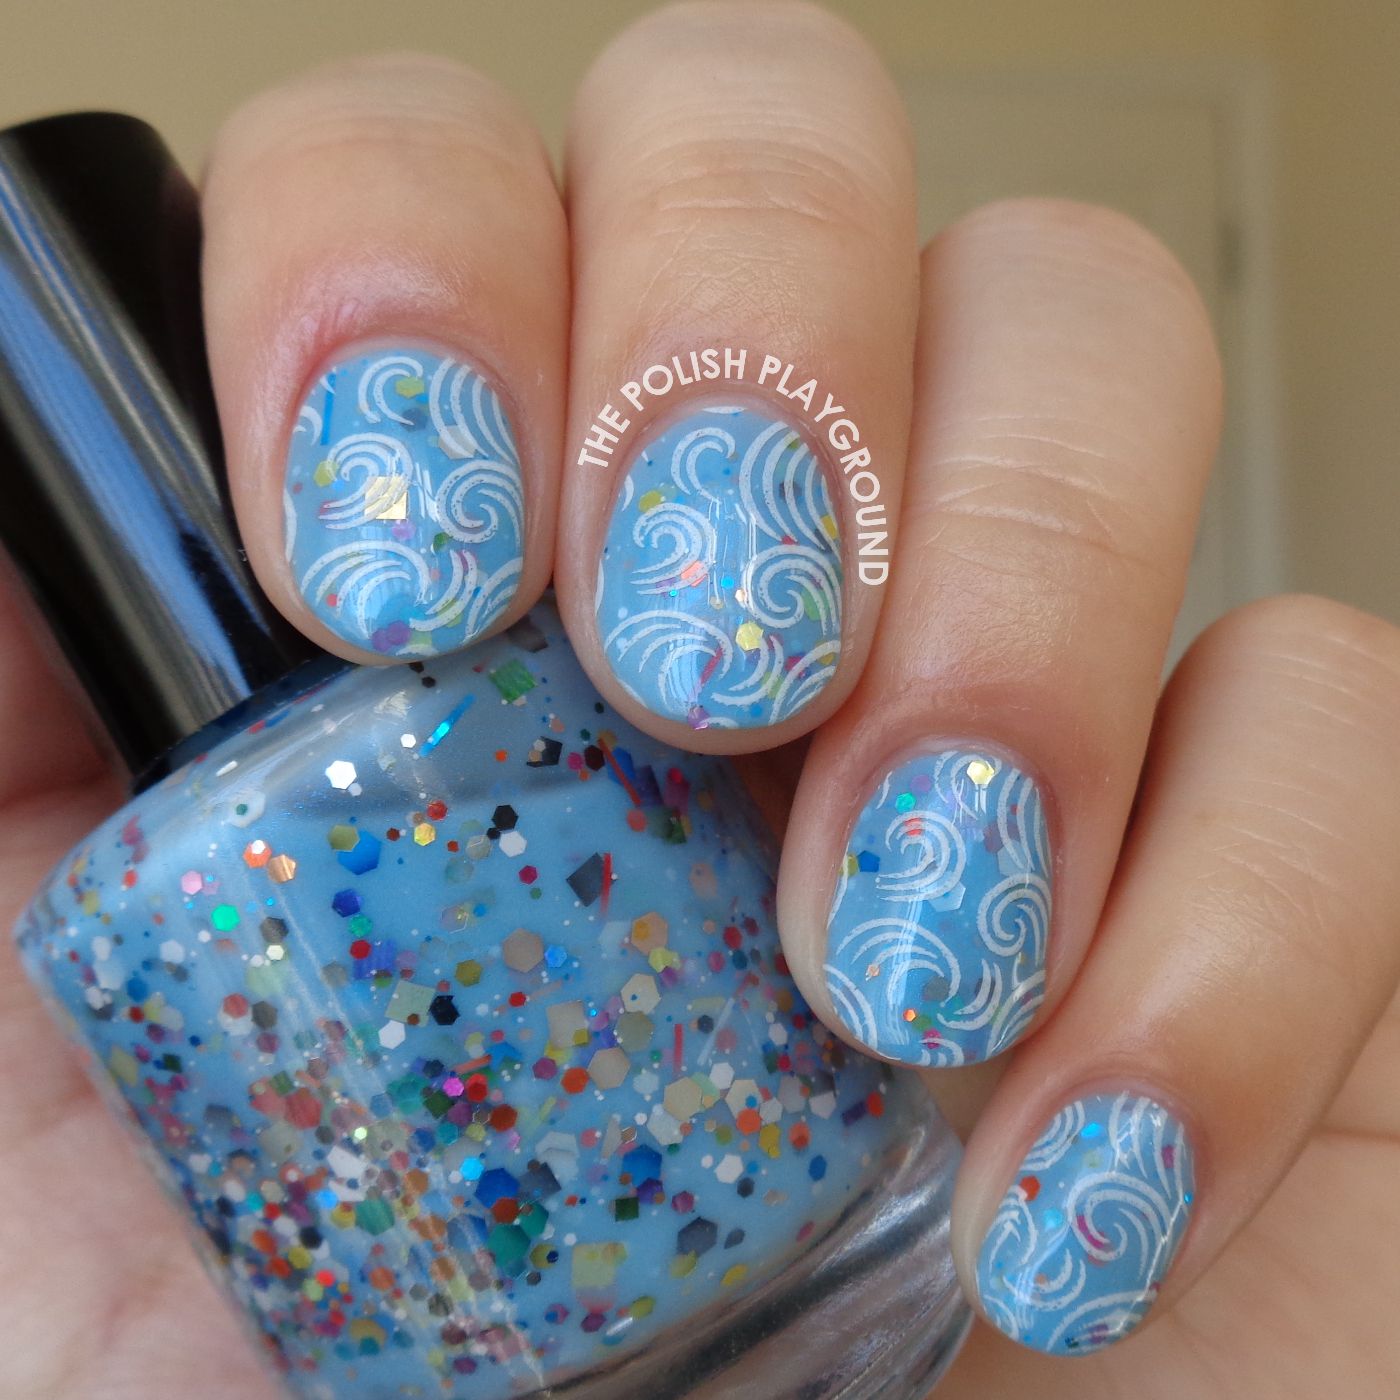 Blue Glitter Crelly with Swirly Waves Stamping Nail Art